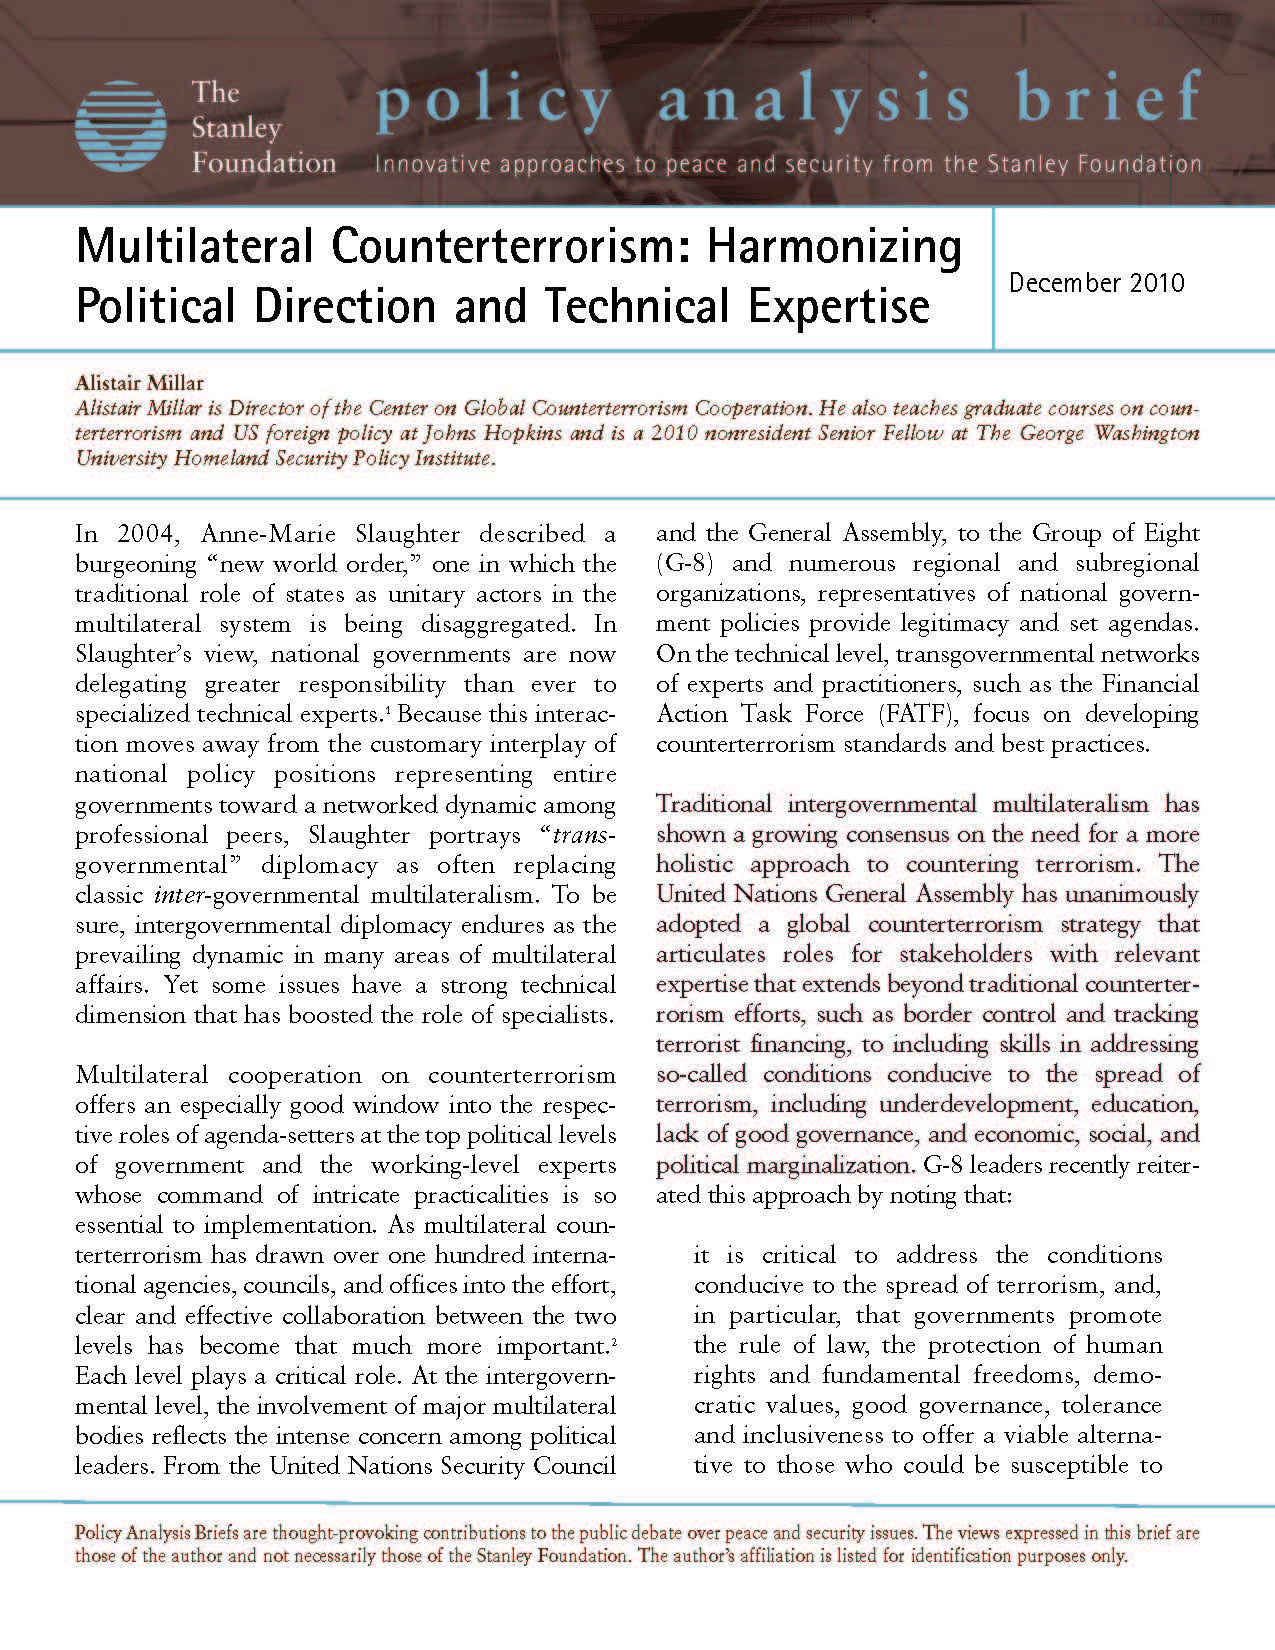 Multilateral Counterterrorism: Harmonizing Political Direction and Technical Expertise